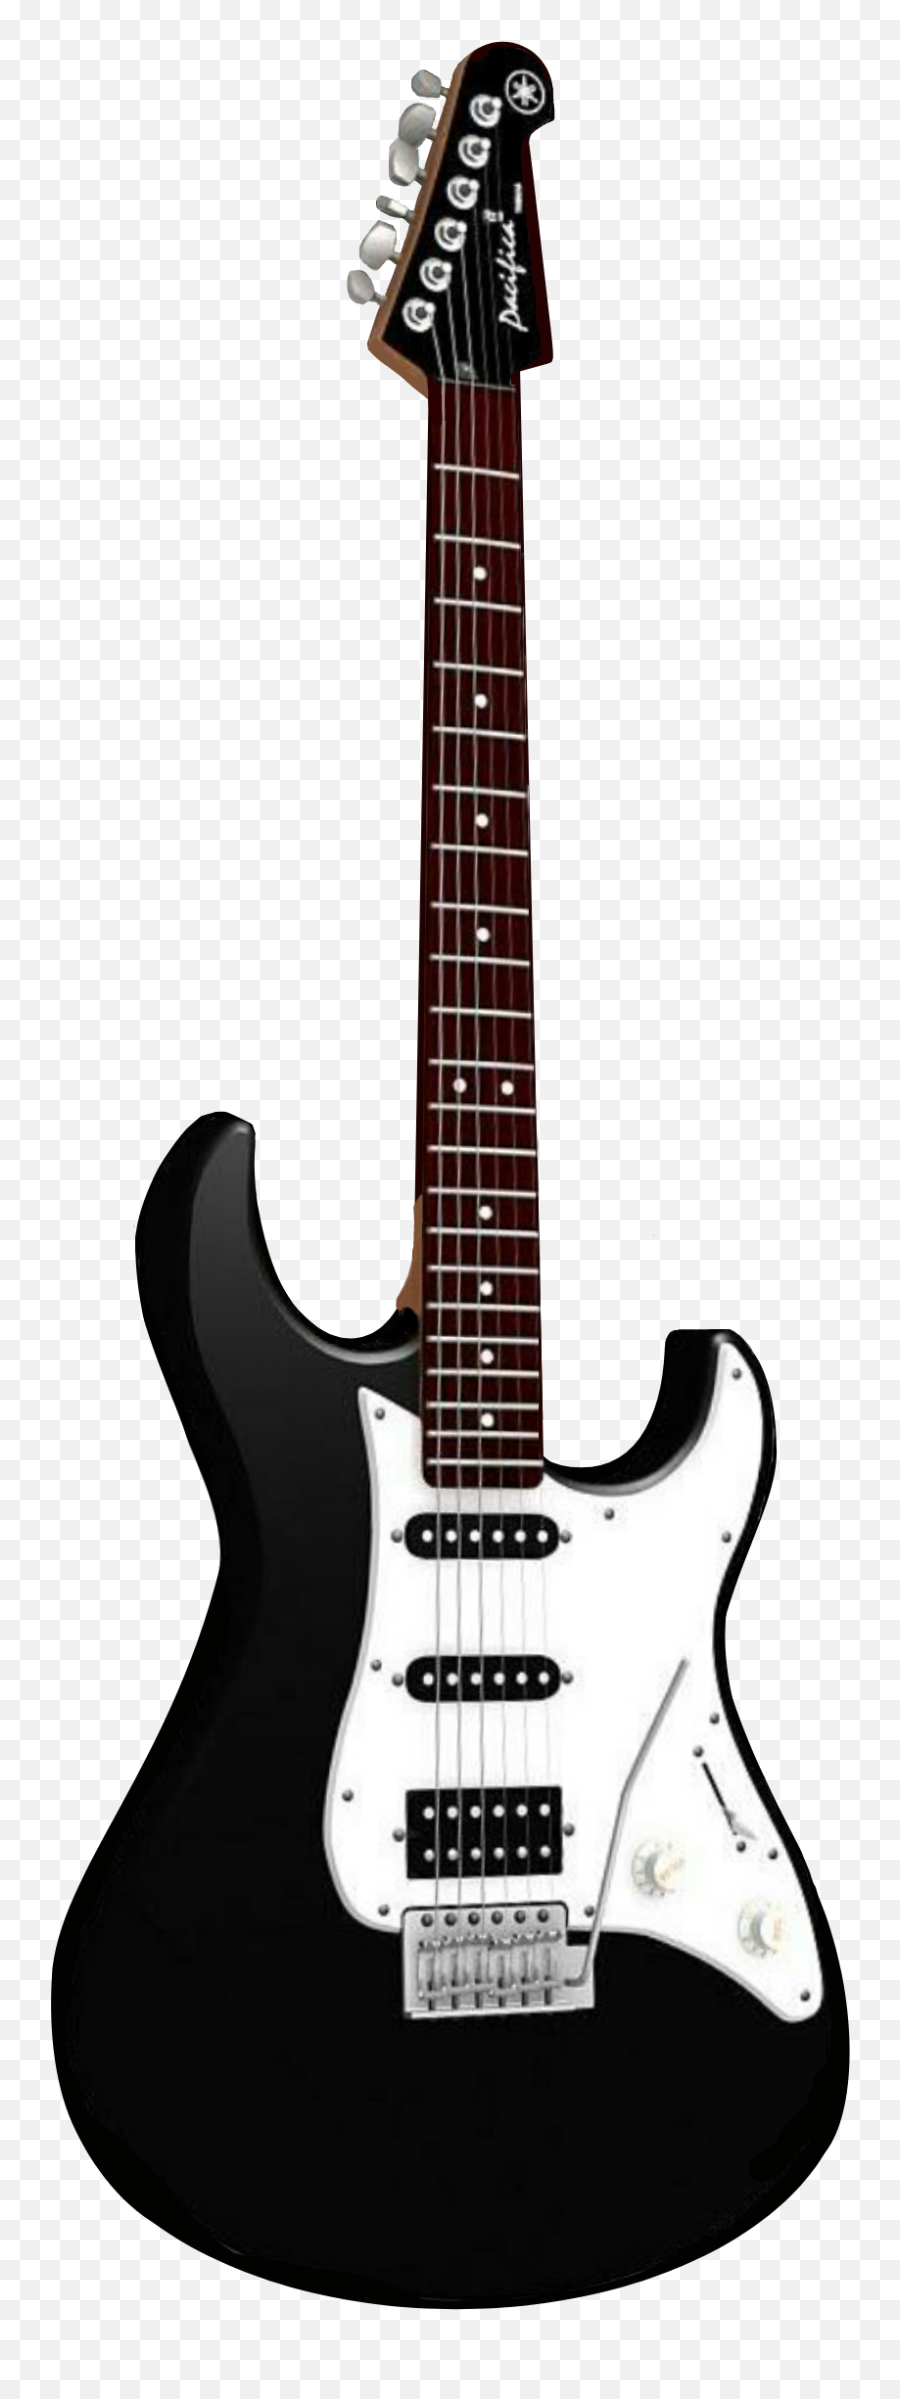 Discover Trending Electric Guitar Stickers Picsart - Electric Guitar Emoji,Electric Guitar Emoji